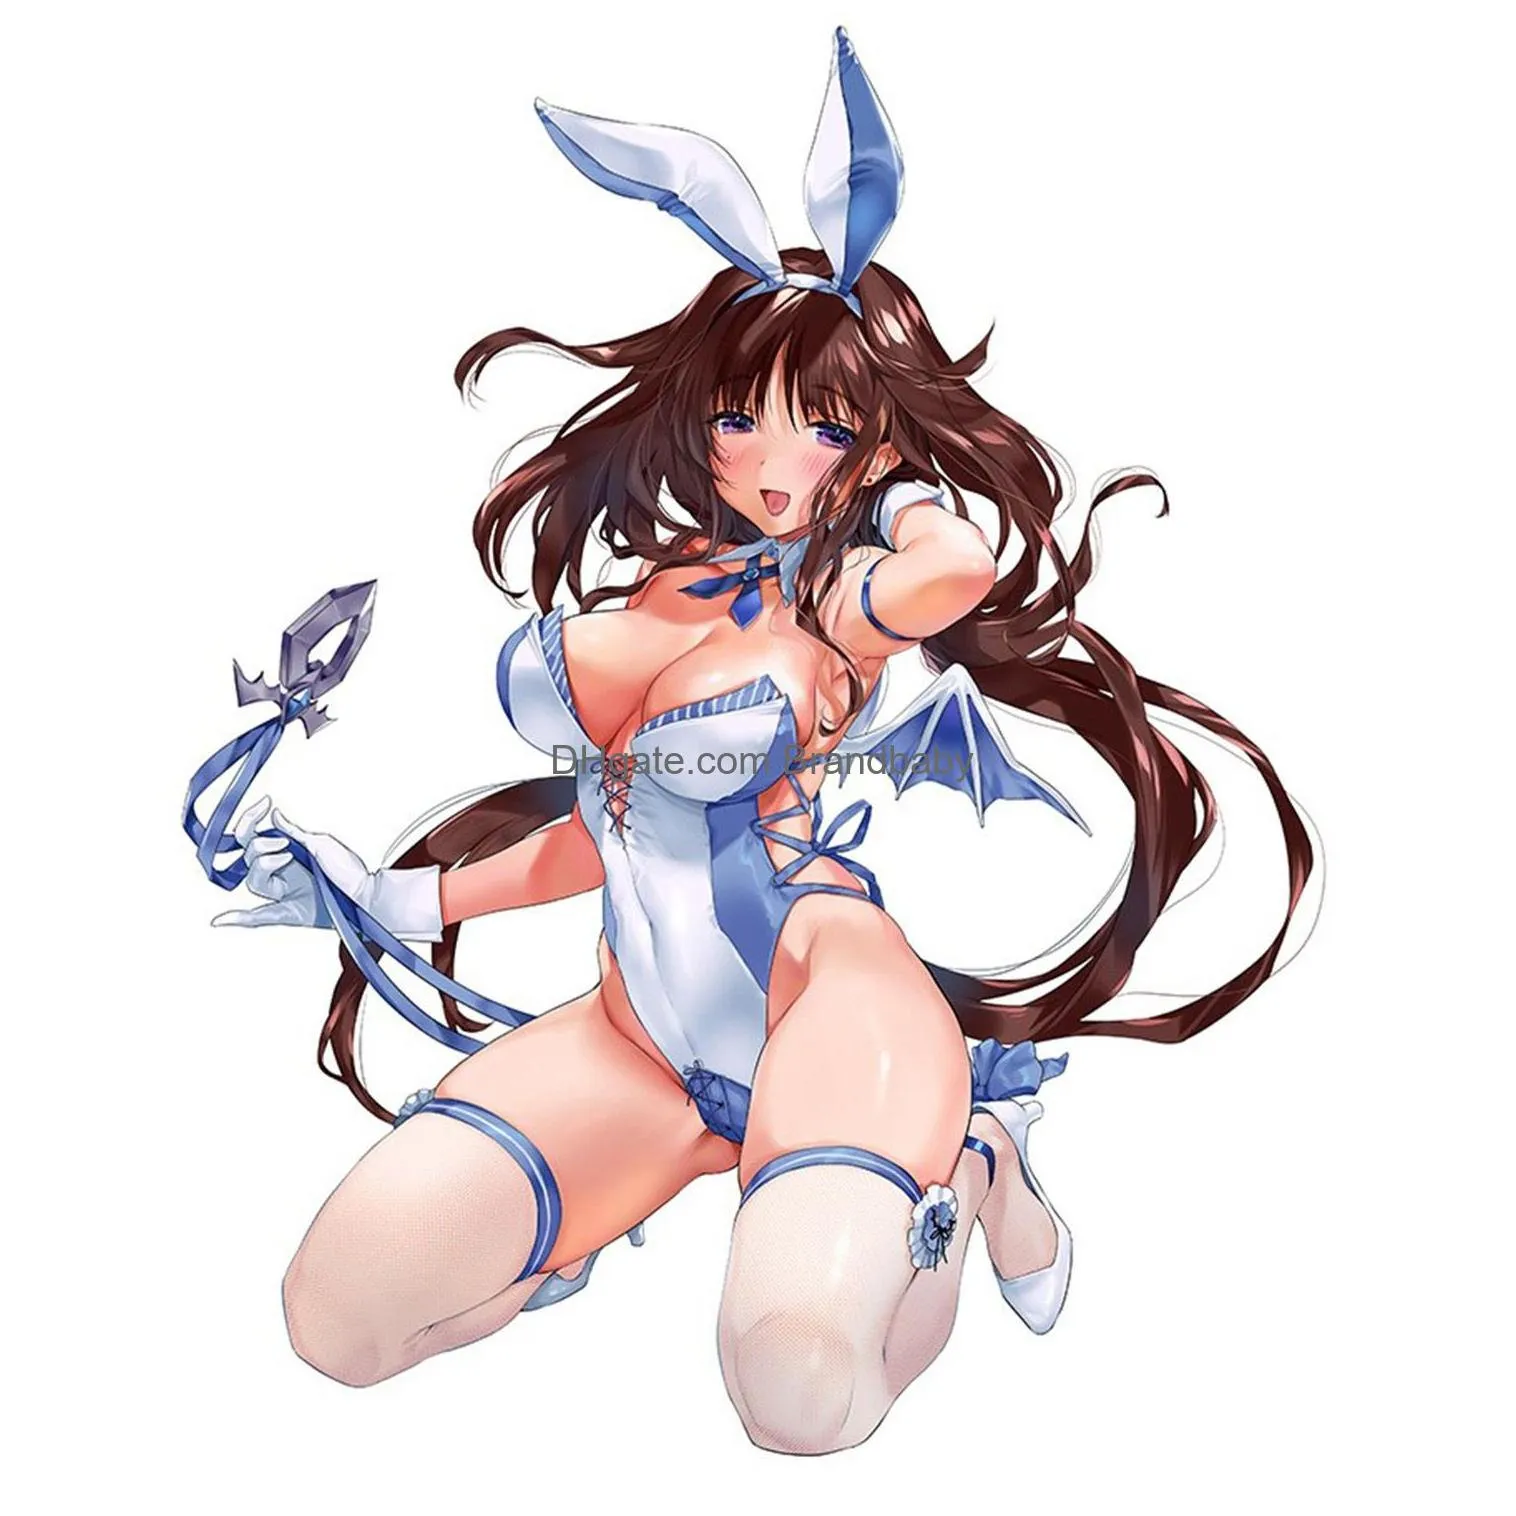 cartoon figures 28cm native maria onee-chan sexy cute nude bunny girl model anime action hentai figure adult collection toys doll